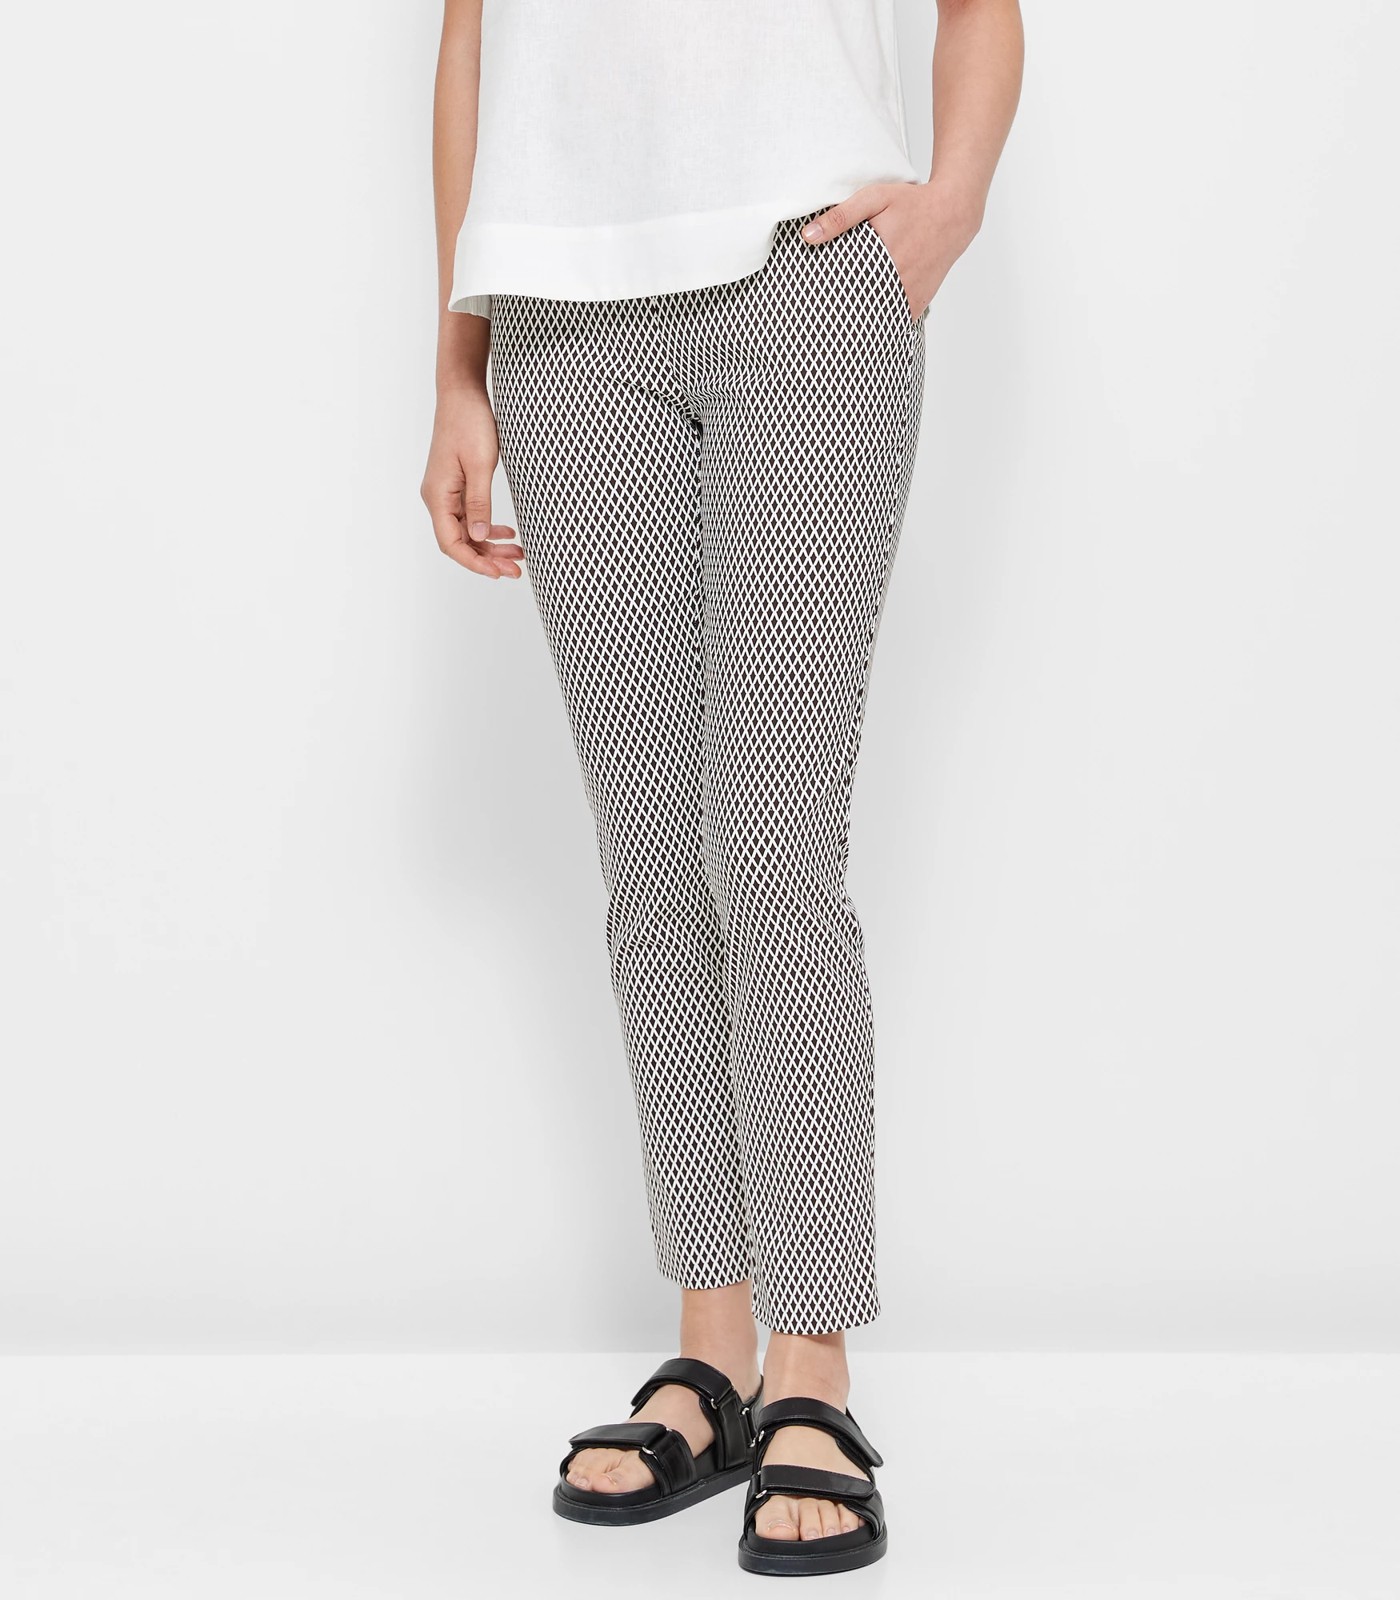 Ankle Length Bengaline Pants - Preview - Choc Geo